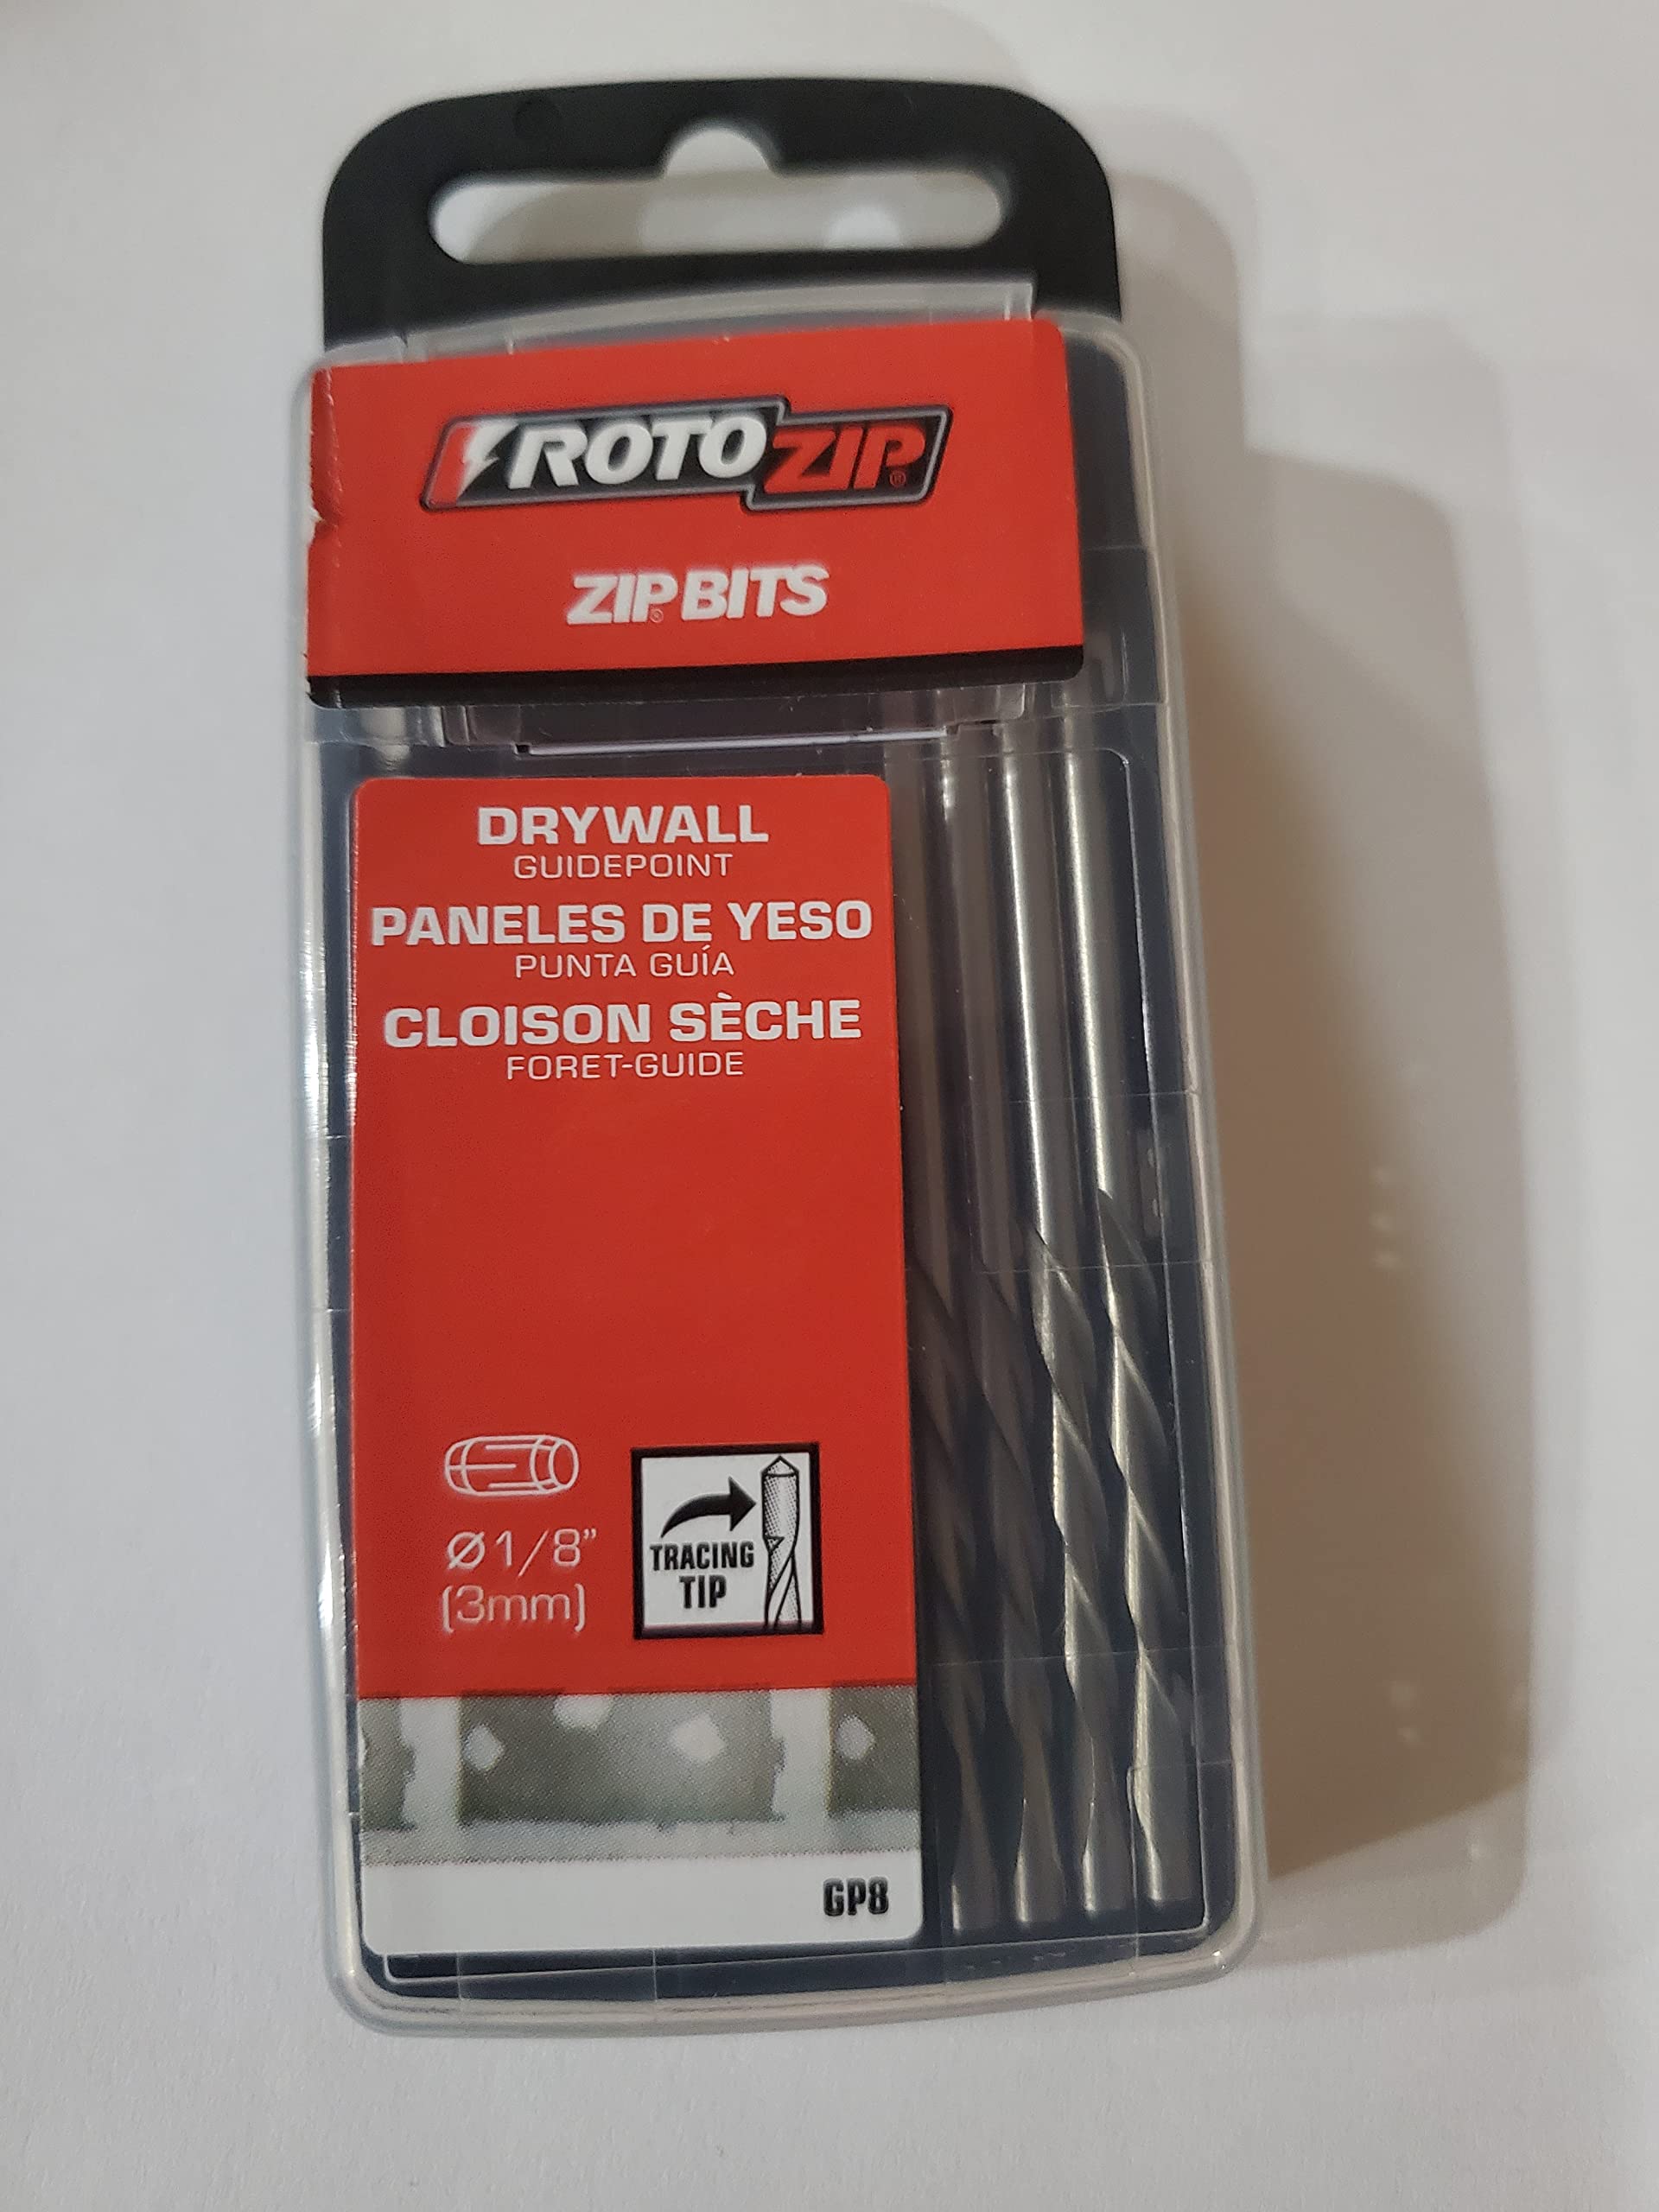 Rotozip GP8 1/8" Guidepoint Zip Bits 8 Count